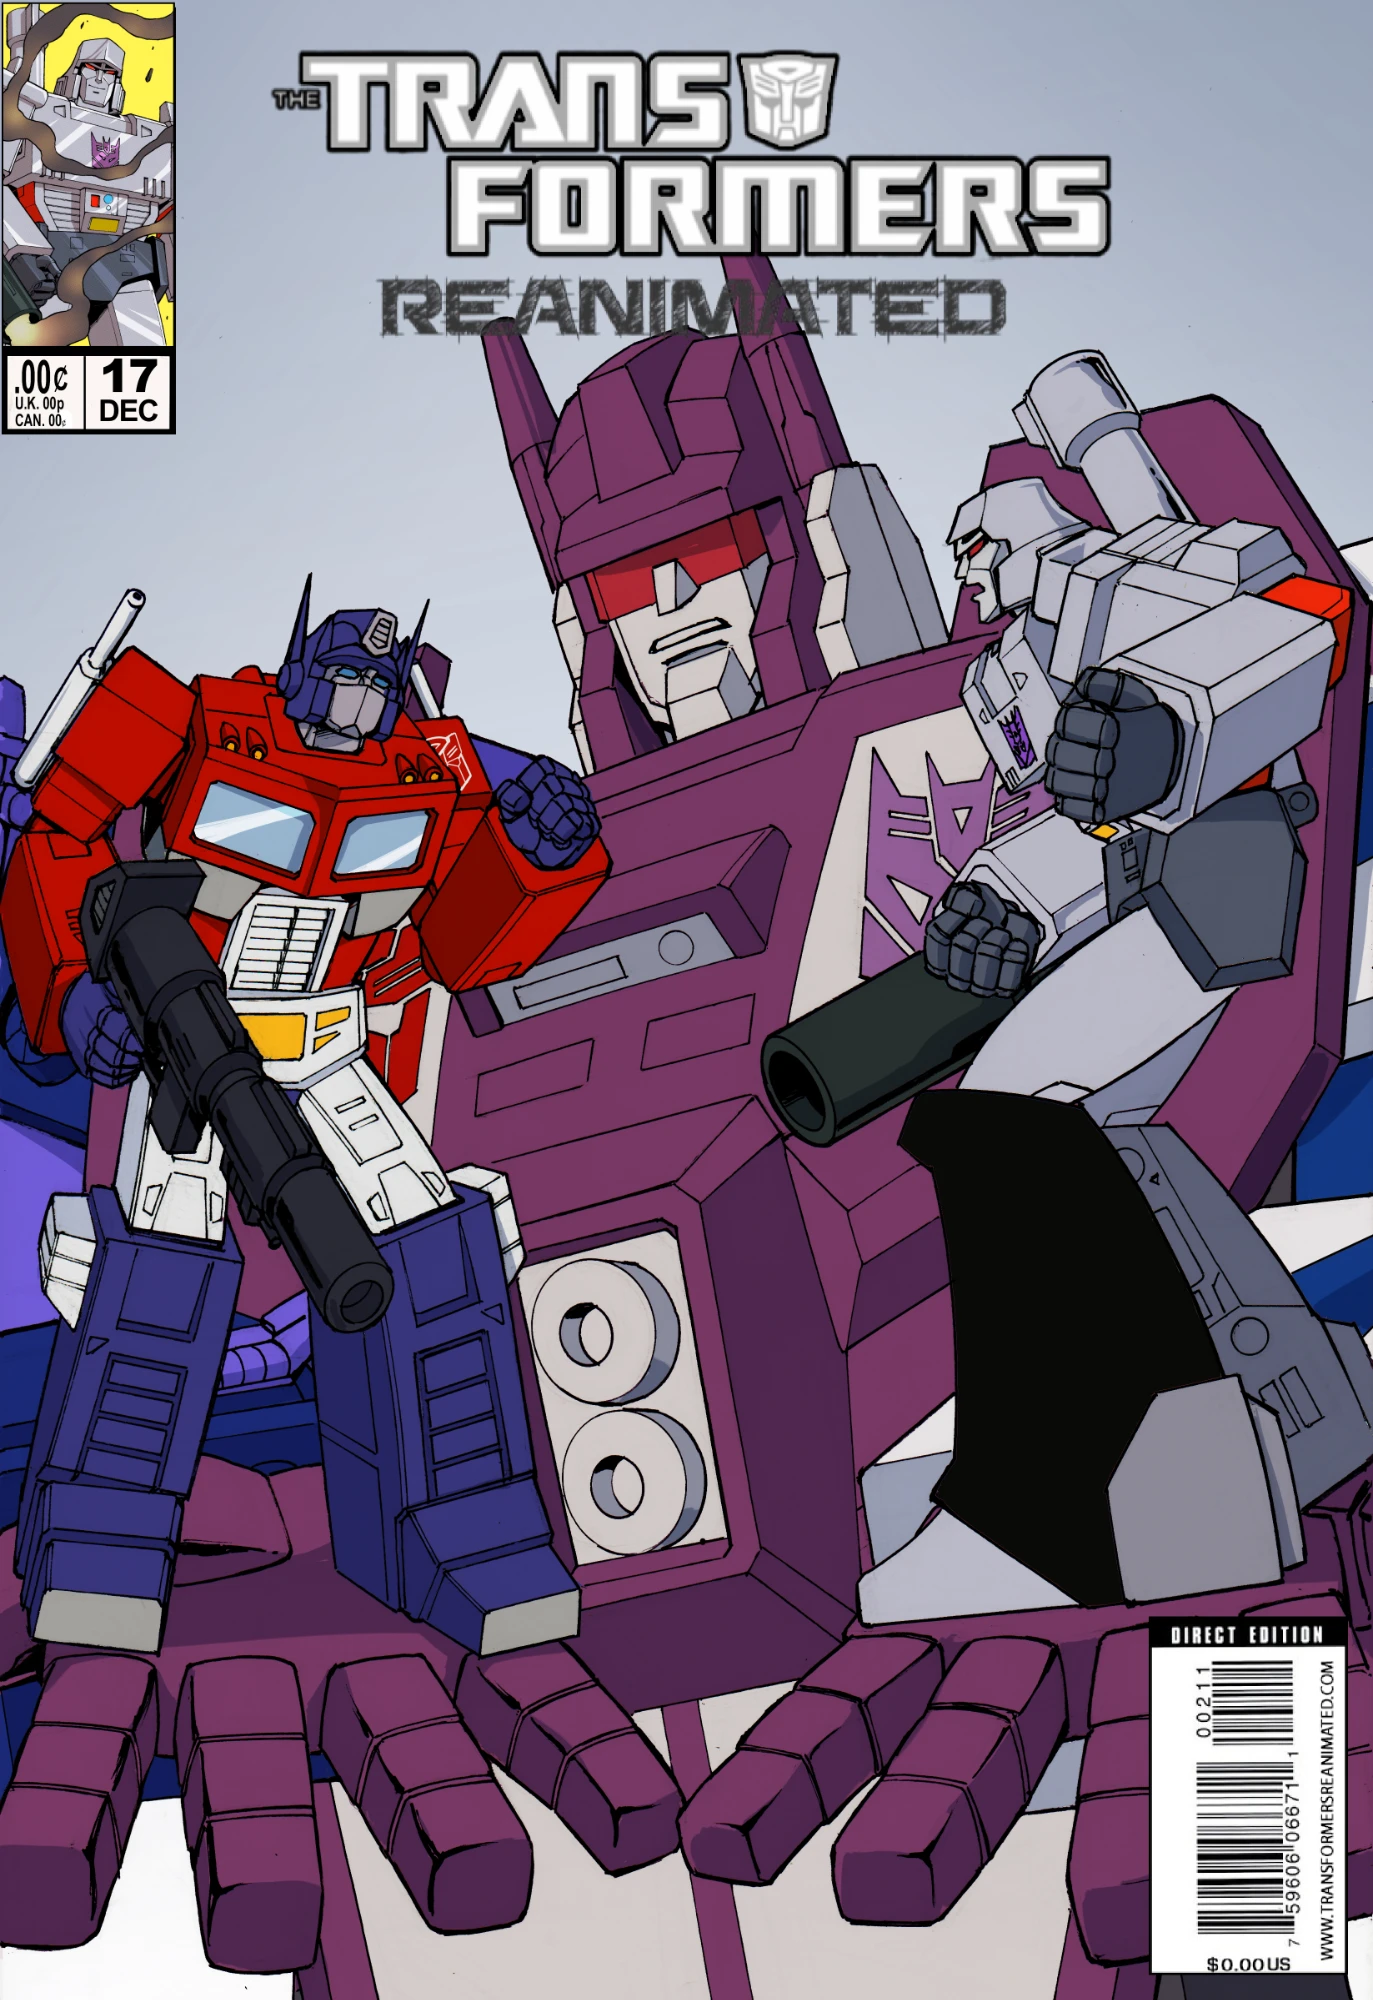 Transformers comic cover with Optimus Prime and Megatron